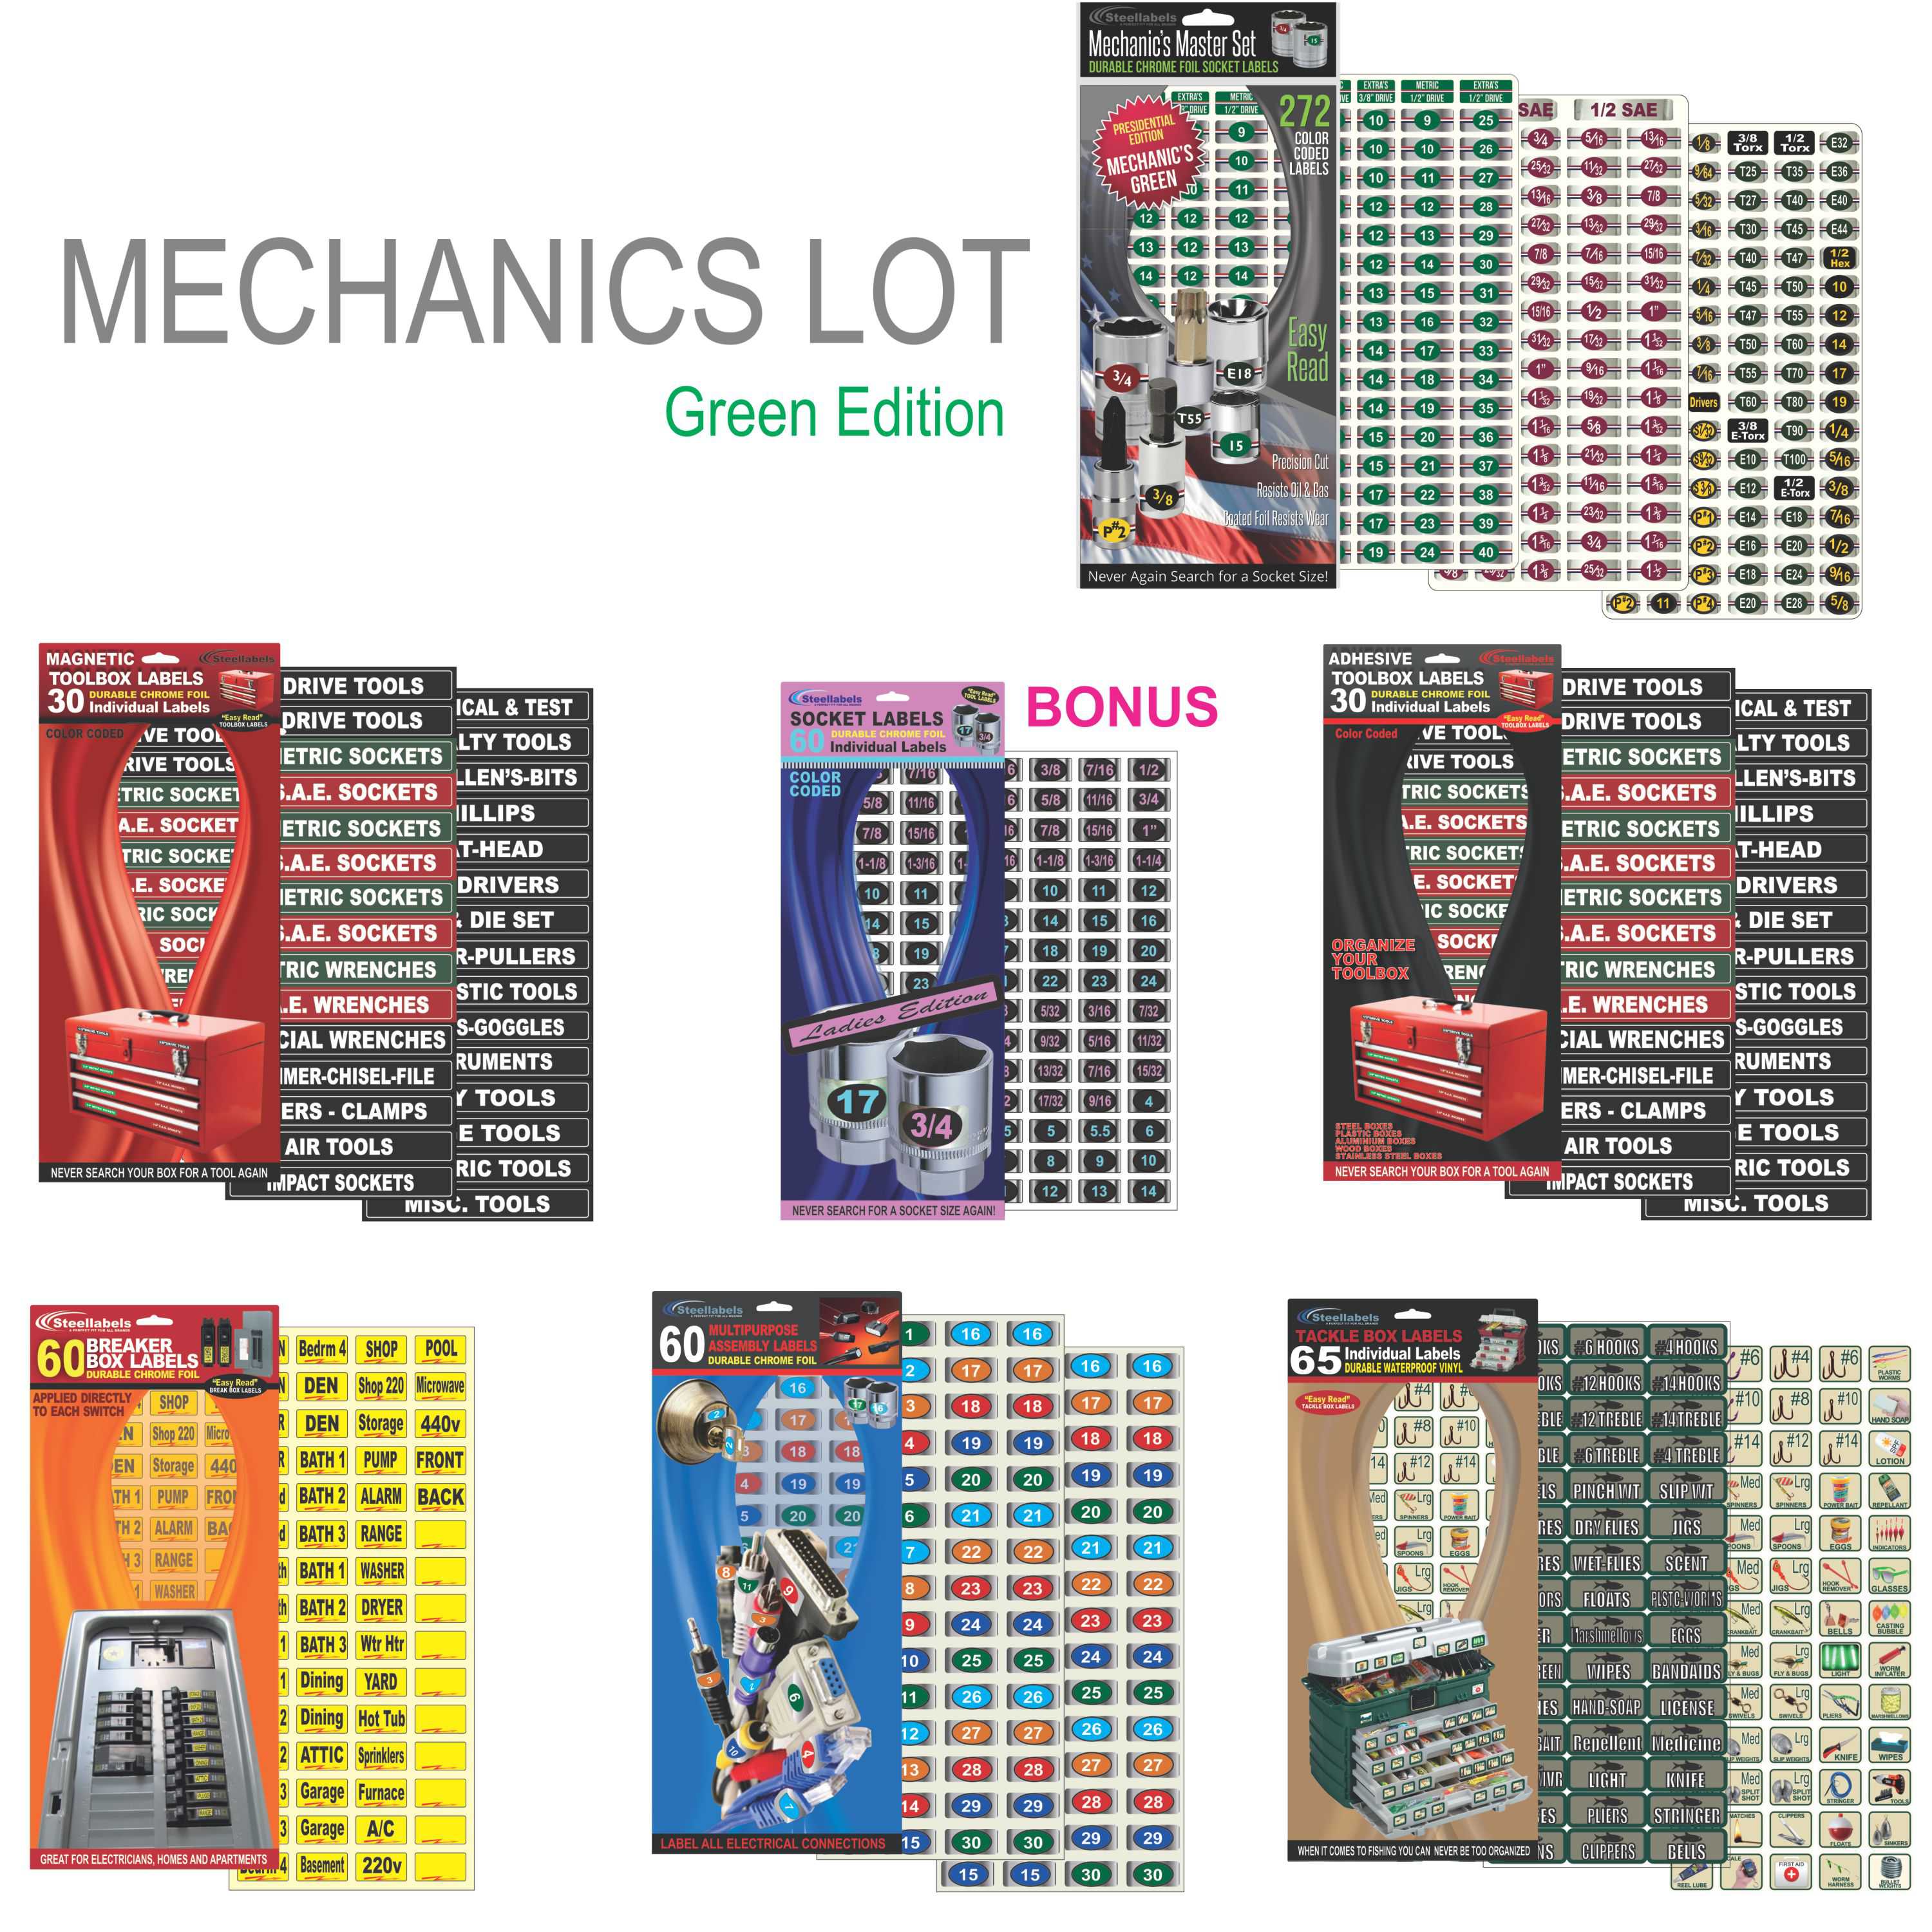 'Mechanics Lot', for Professional and Home Mechanics. Combo Pack includes Magnetic Toolbox Labels, Master & Regular Chrome Socket Label Sets, Circuit Breaker & Tackle Box Decal Sets, Universal Assembl